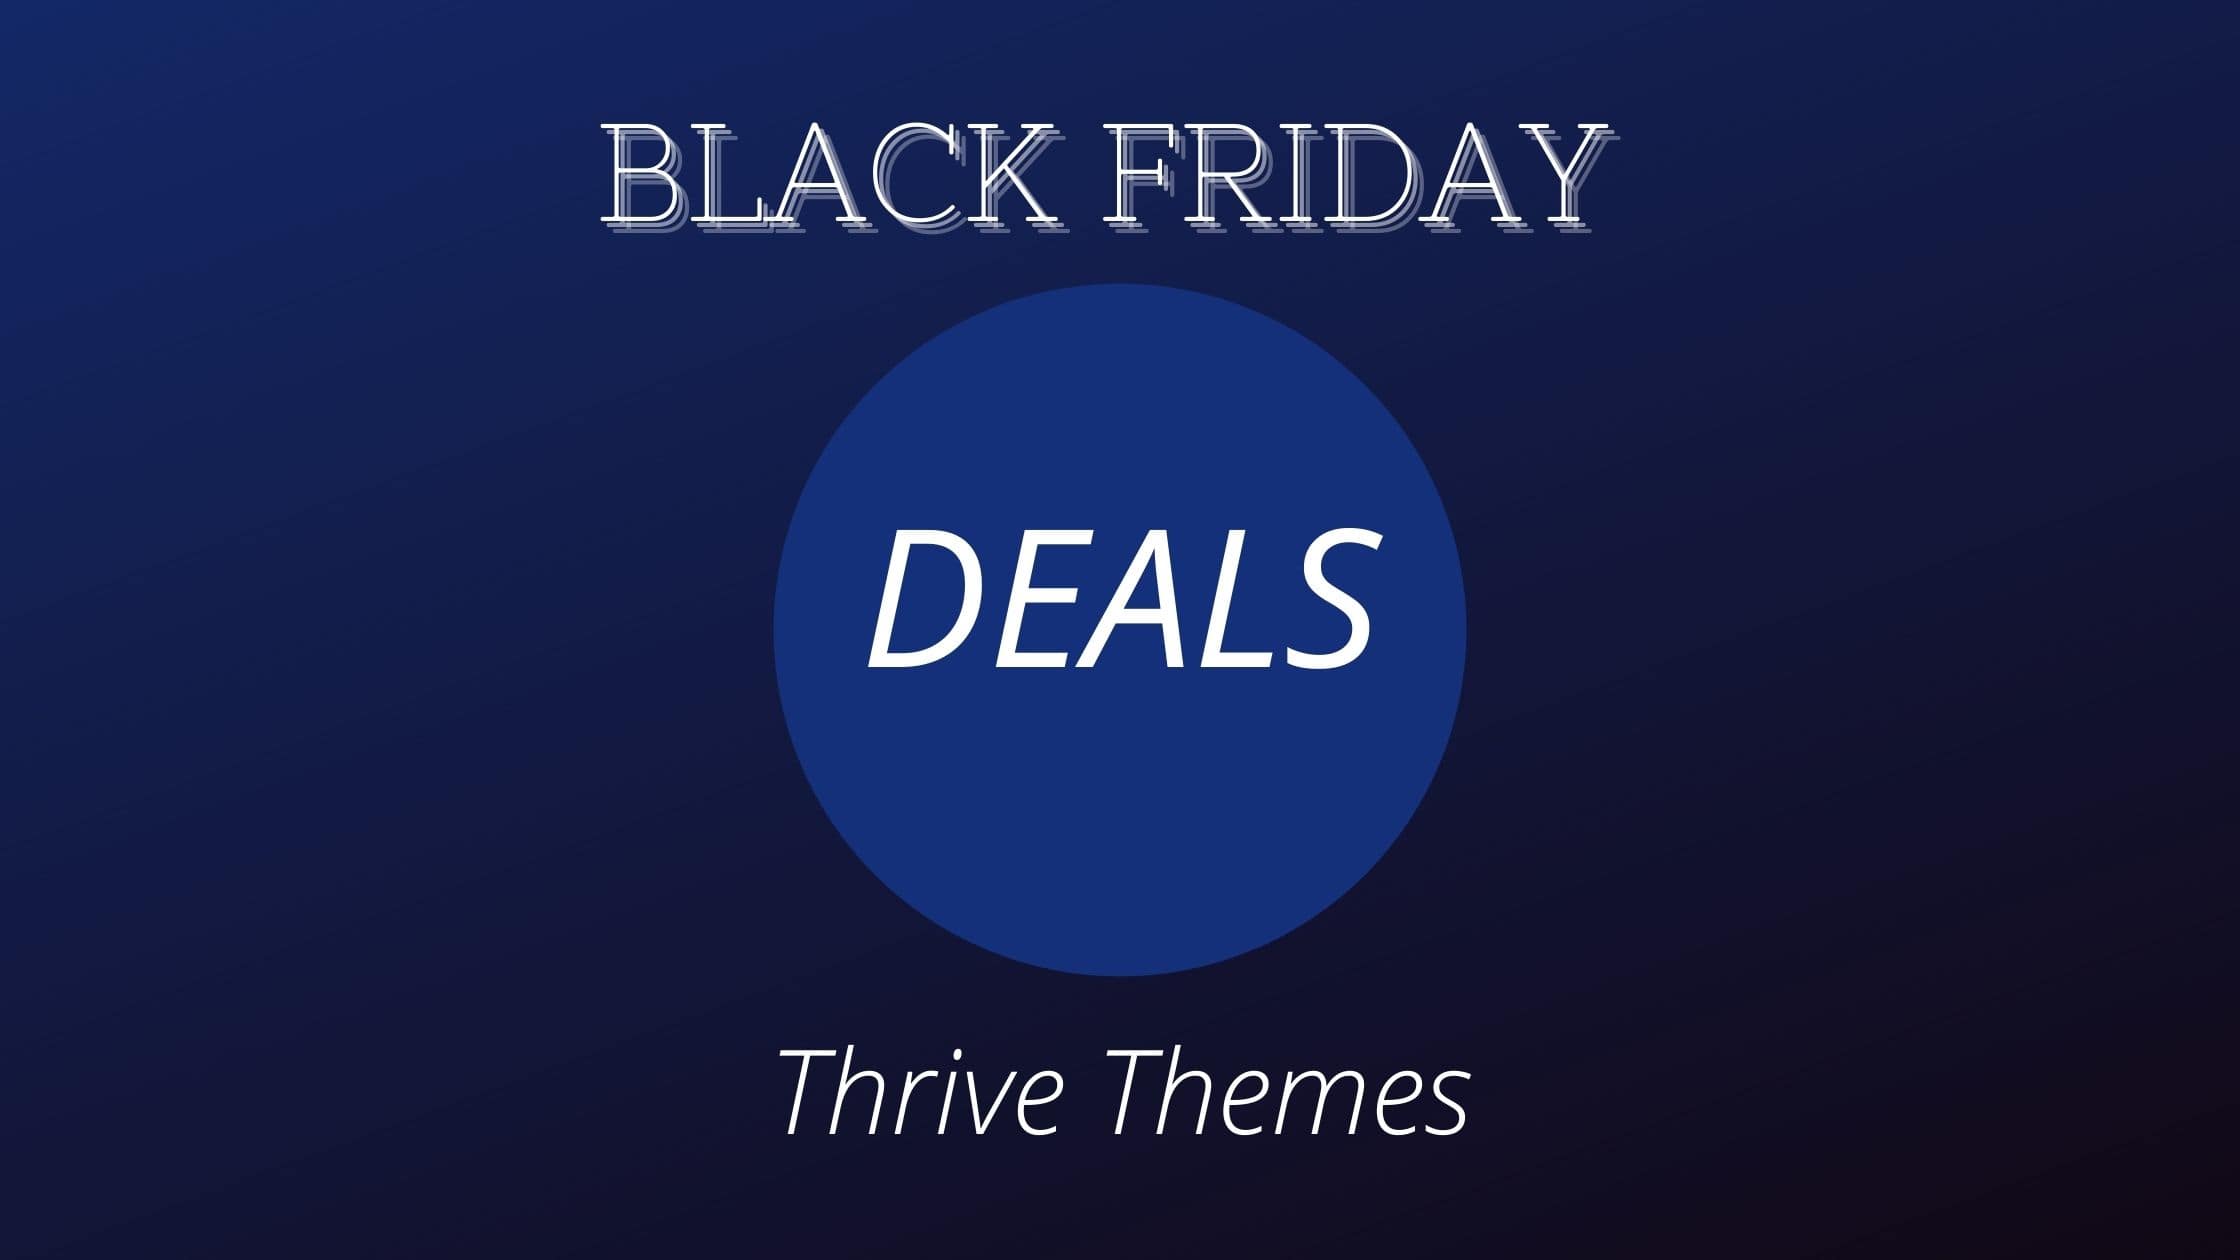 Thrive Themes Black Friday Deals 2021- Get Up To 36% Off image